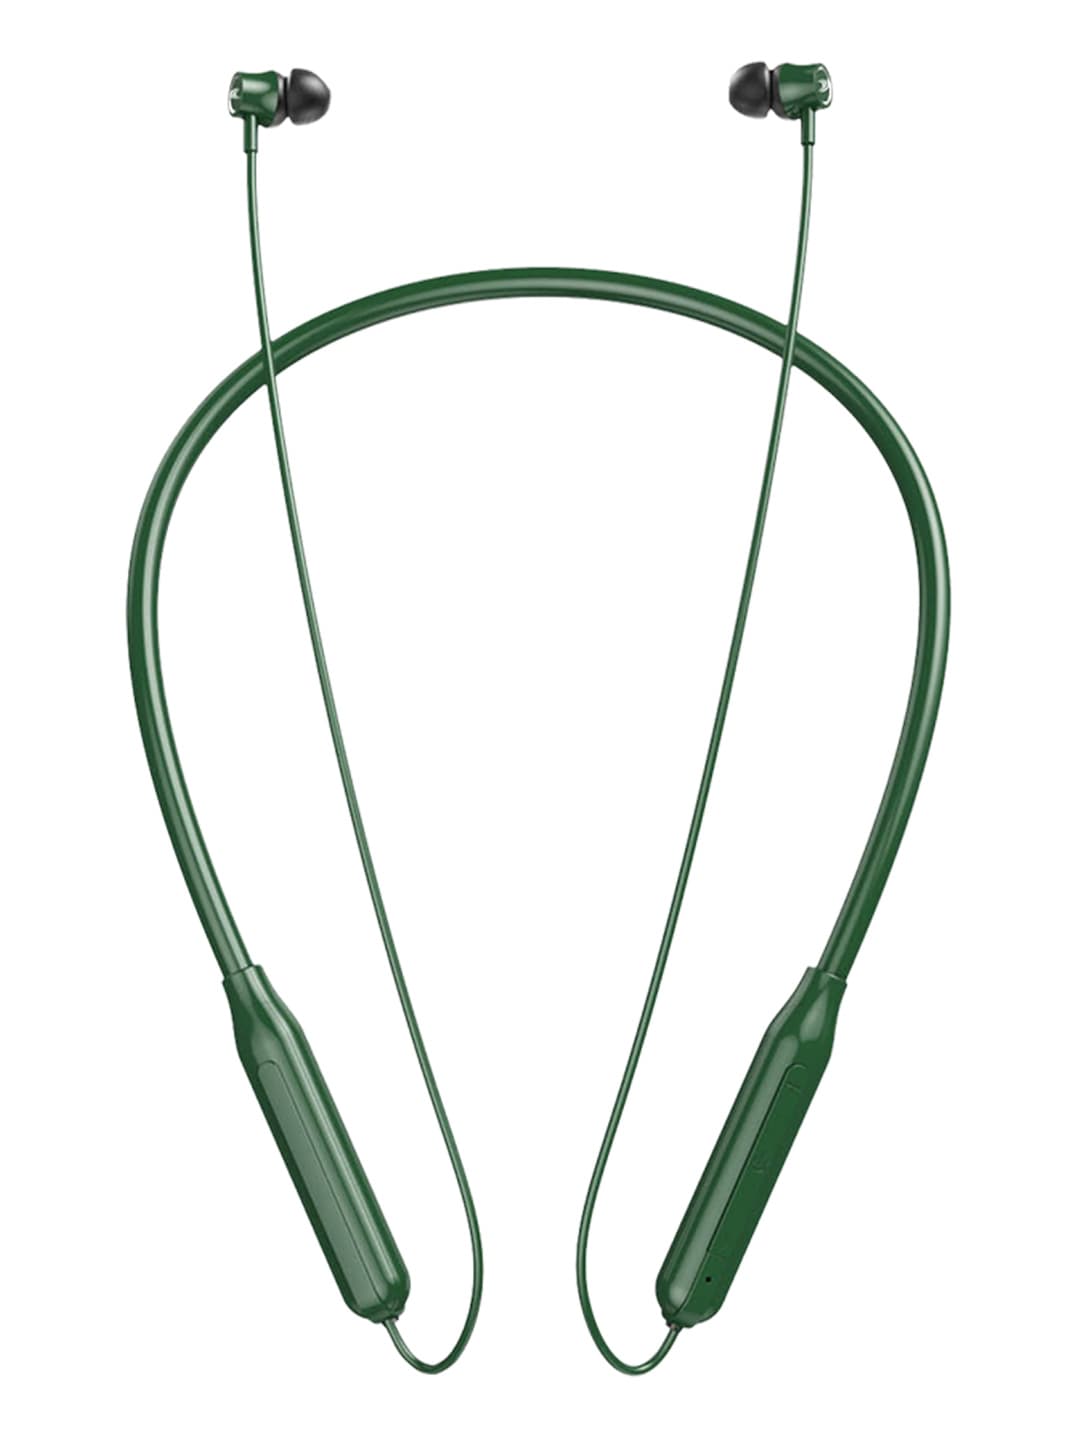 Cellecor  Green Solid NK Wireless Bluetooth Earphone Neckband Price in India